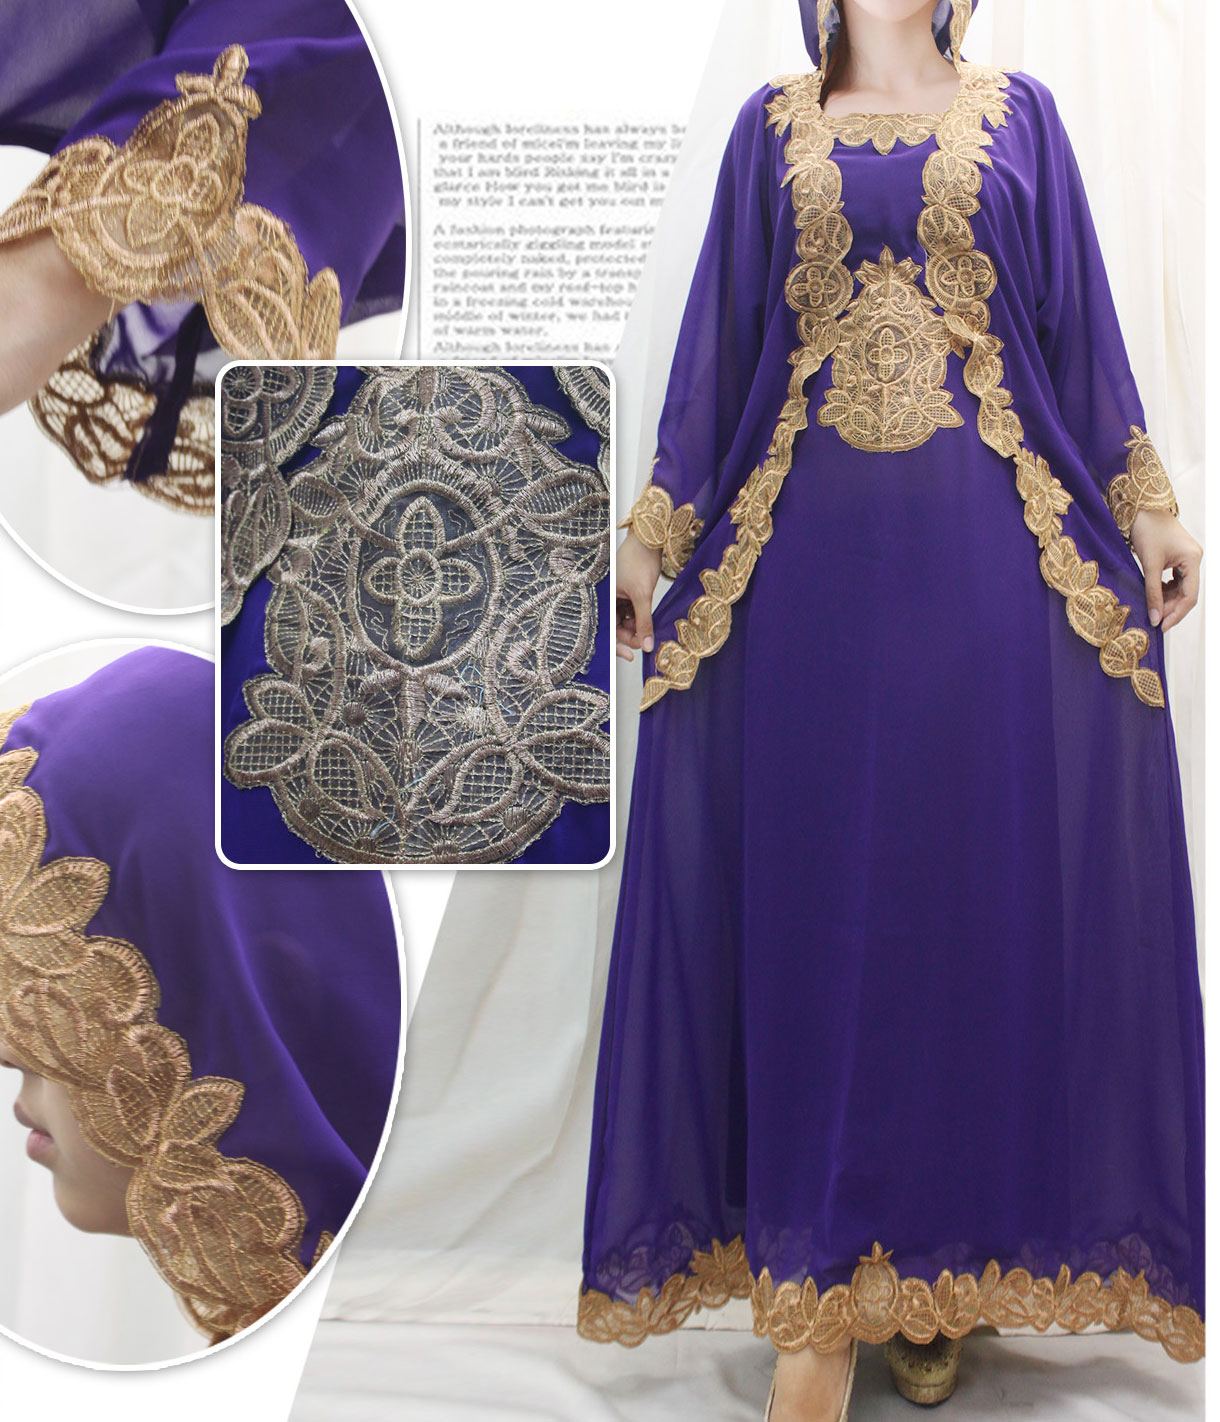 Fancy Gold Embroidery Great For Purple Caftan Dress With Wedding